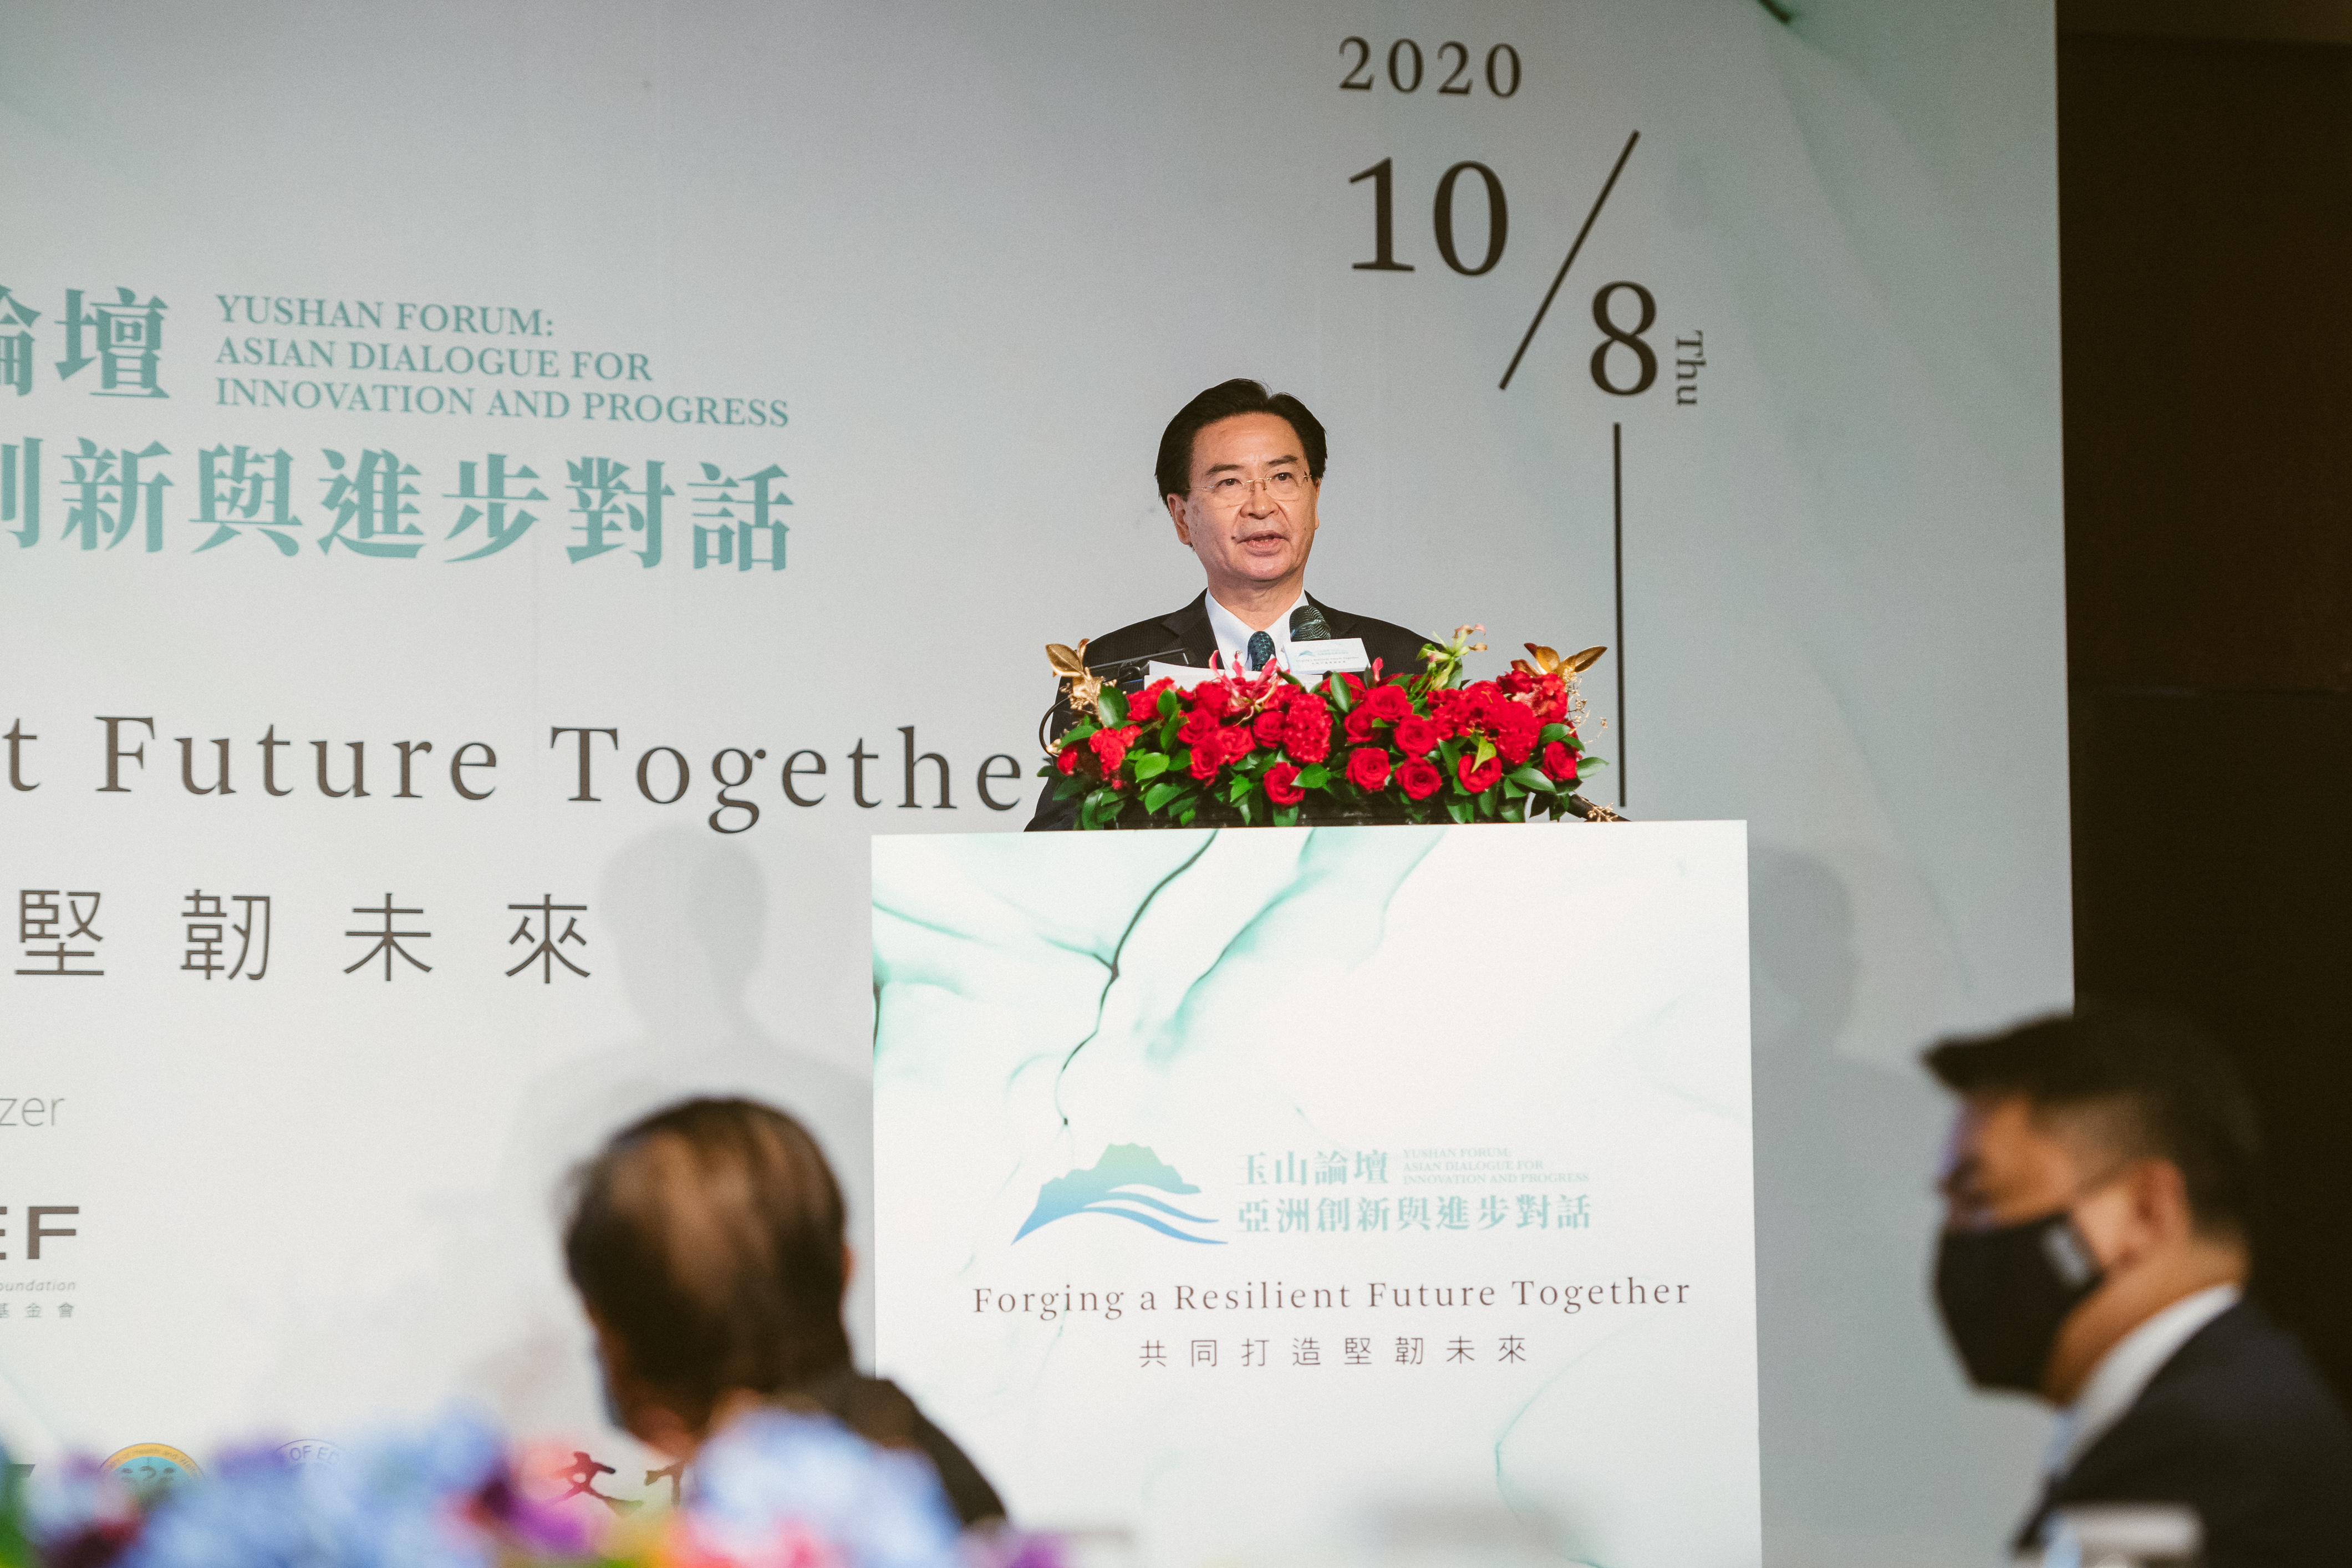 Remarks by Joseph Wu, Minister of Foreign Affairs